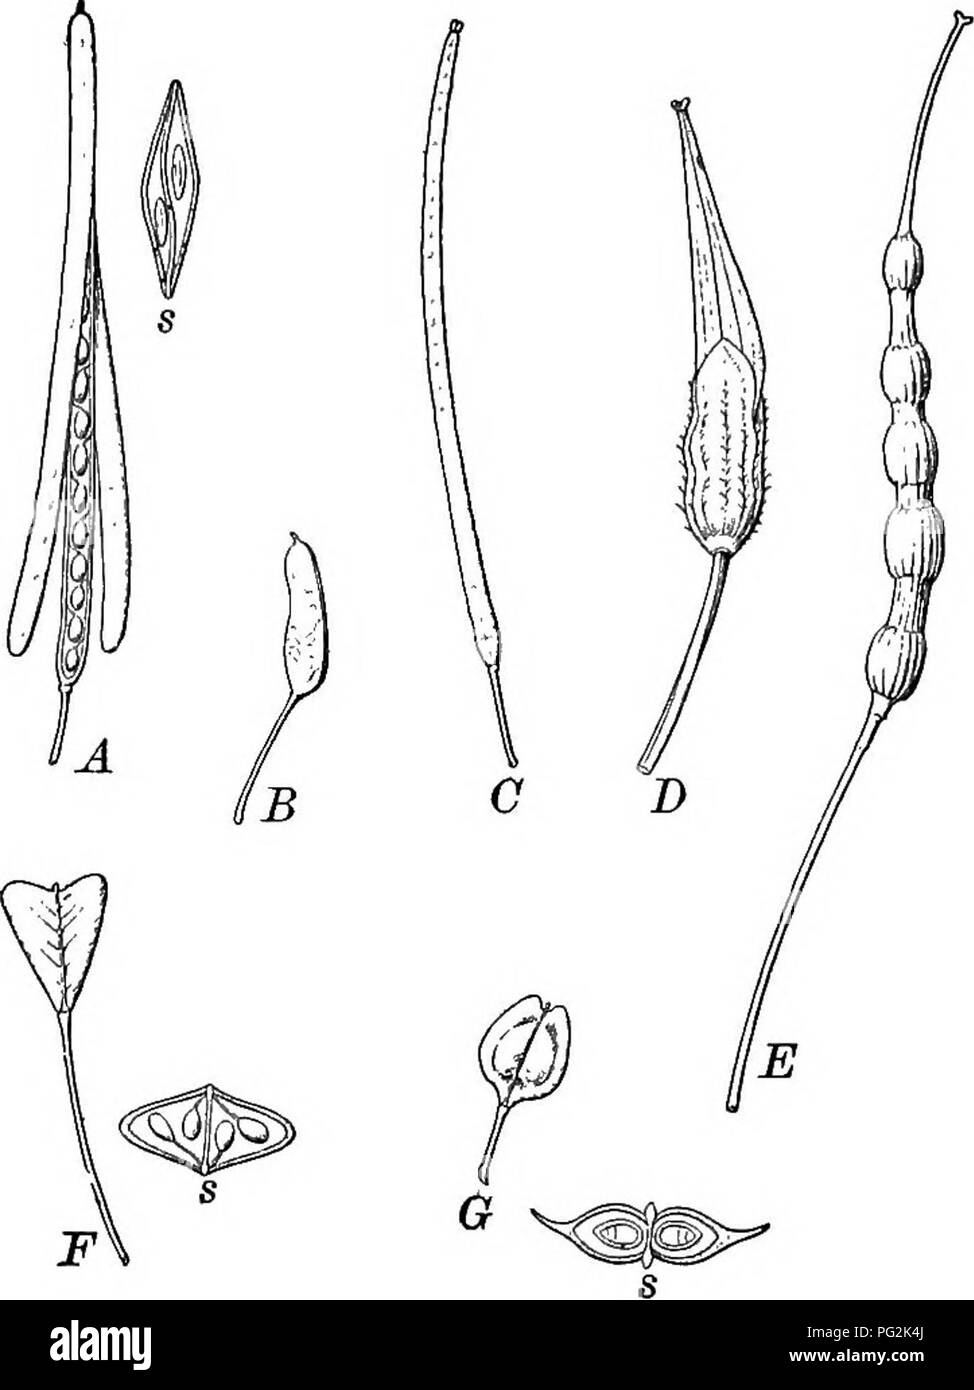 . Key and flora : northern and central states . Botany. 100 KEY AND FLORA. Fig. 18. Types of pods of Cruciferoe A, flattened pod of Arabis, seeds.in a single row in each cell: s, cross section of pod, showing flattening parallel to the partition. B, pod of Radicula palustris, seeds in several rows. C, nearly cylindrical pod of Sisymbrium. D, beaked pod of white mustard (Sinapis alba). E, dried necklace-shaped and beaked pod of radish (Saphanus Raphanistrum). F, flattened pod of shepherd's purse {Capsella Bursa-pastoris): s, cross section, showing flat&gt; tening at right angles to the partitio Stock Photo